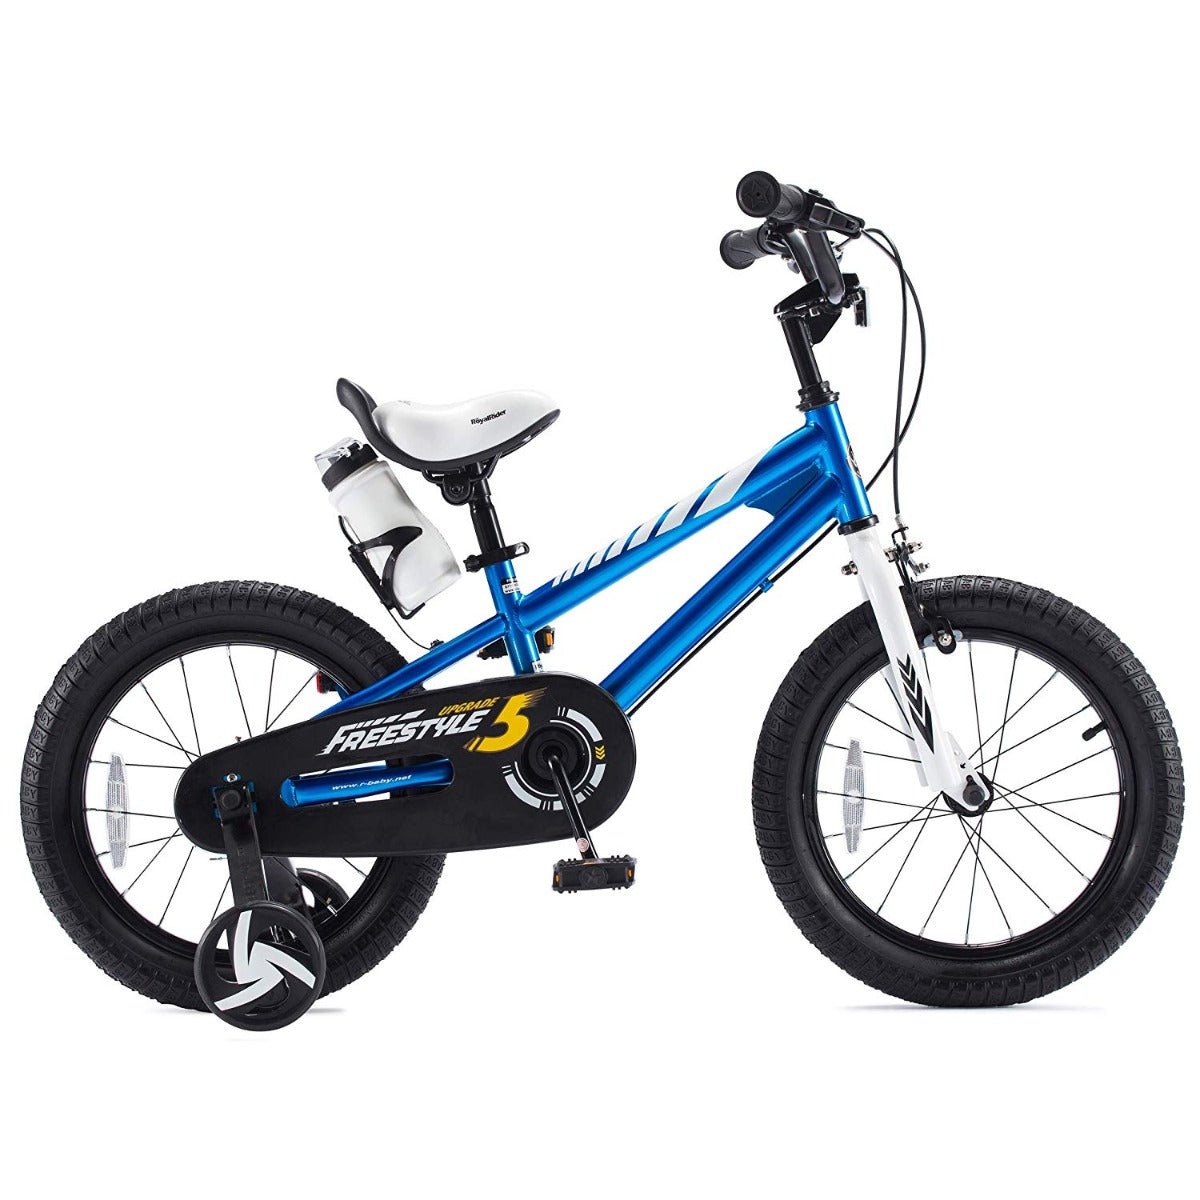 RoyalBaby Freestyle Children’s Pedal Bicycle & Stabilisers 12” Wheel - Blue